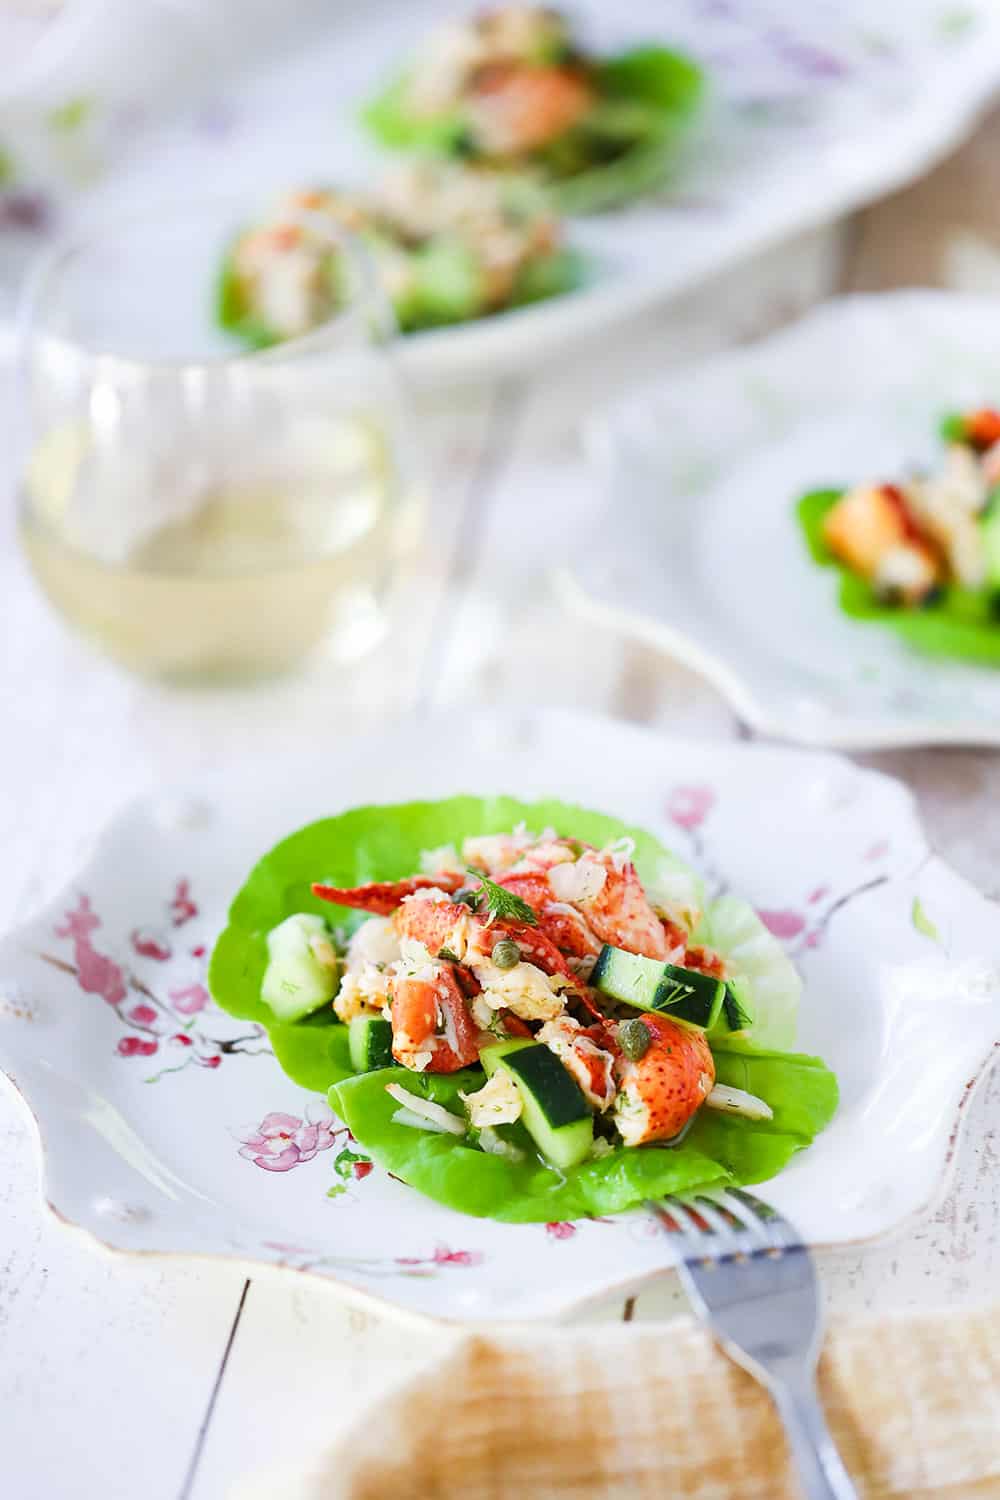 A mound of lobster salad with cucumber on a leaf of lettuce on a decorative plate next to a glass of white wine and a platter.